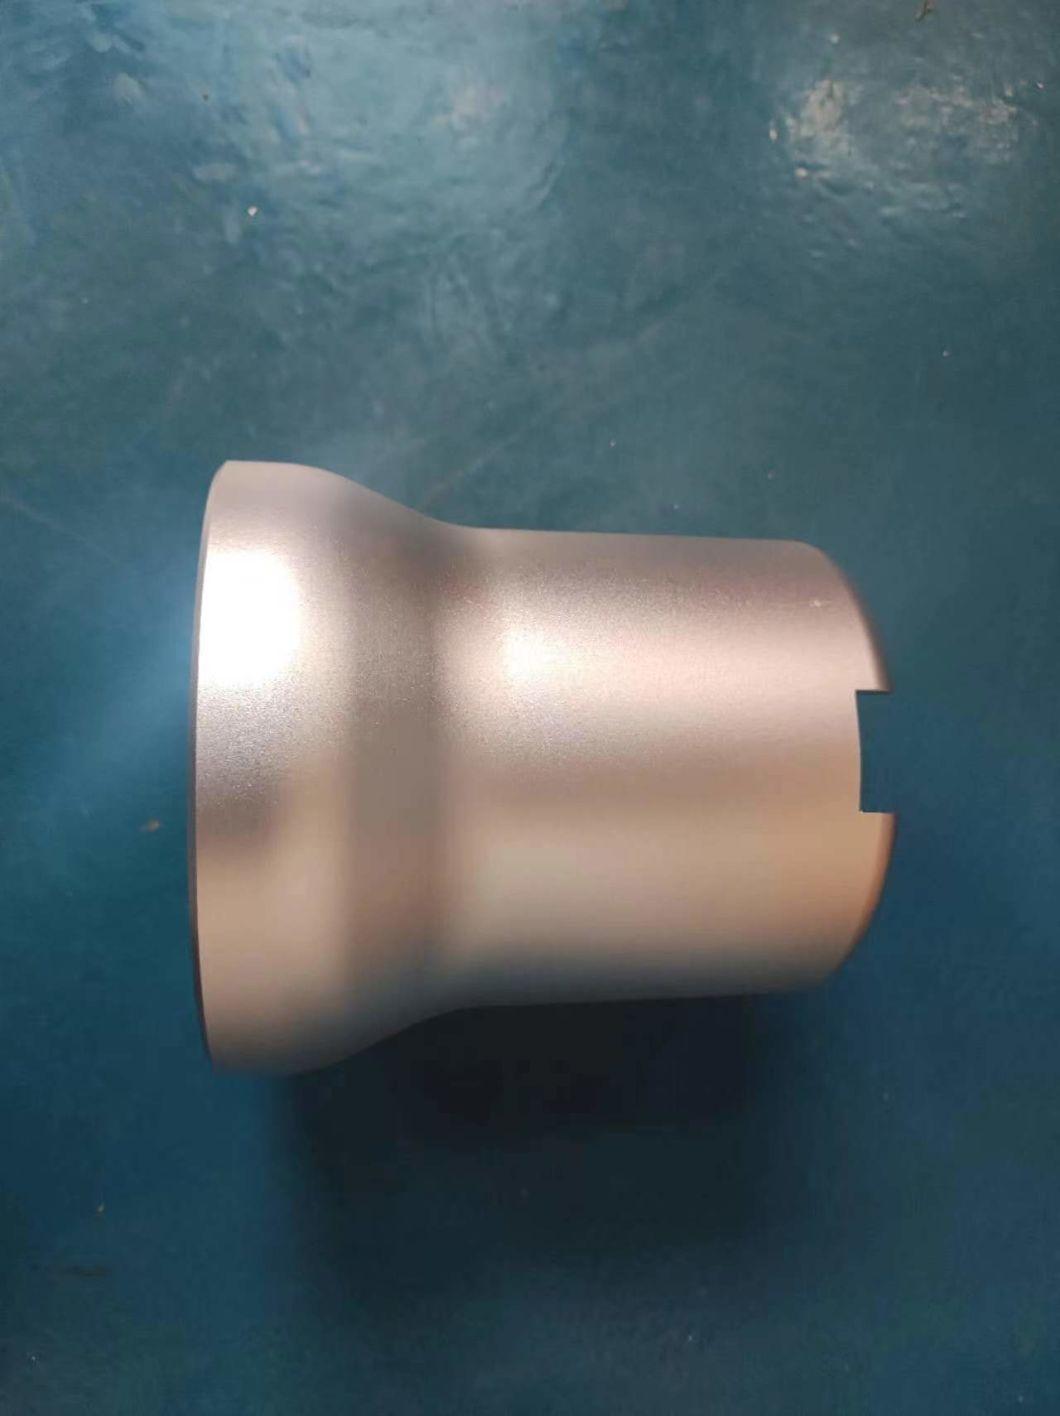 API Nc46 Male Thread Protector to Protect Thread for Oilfield